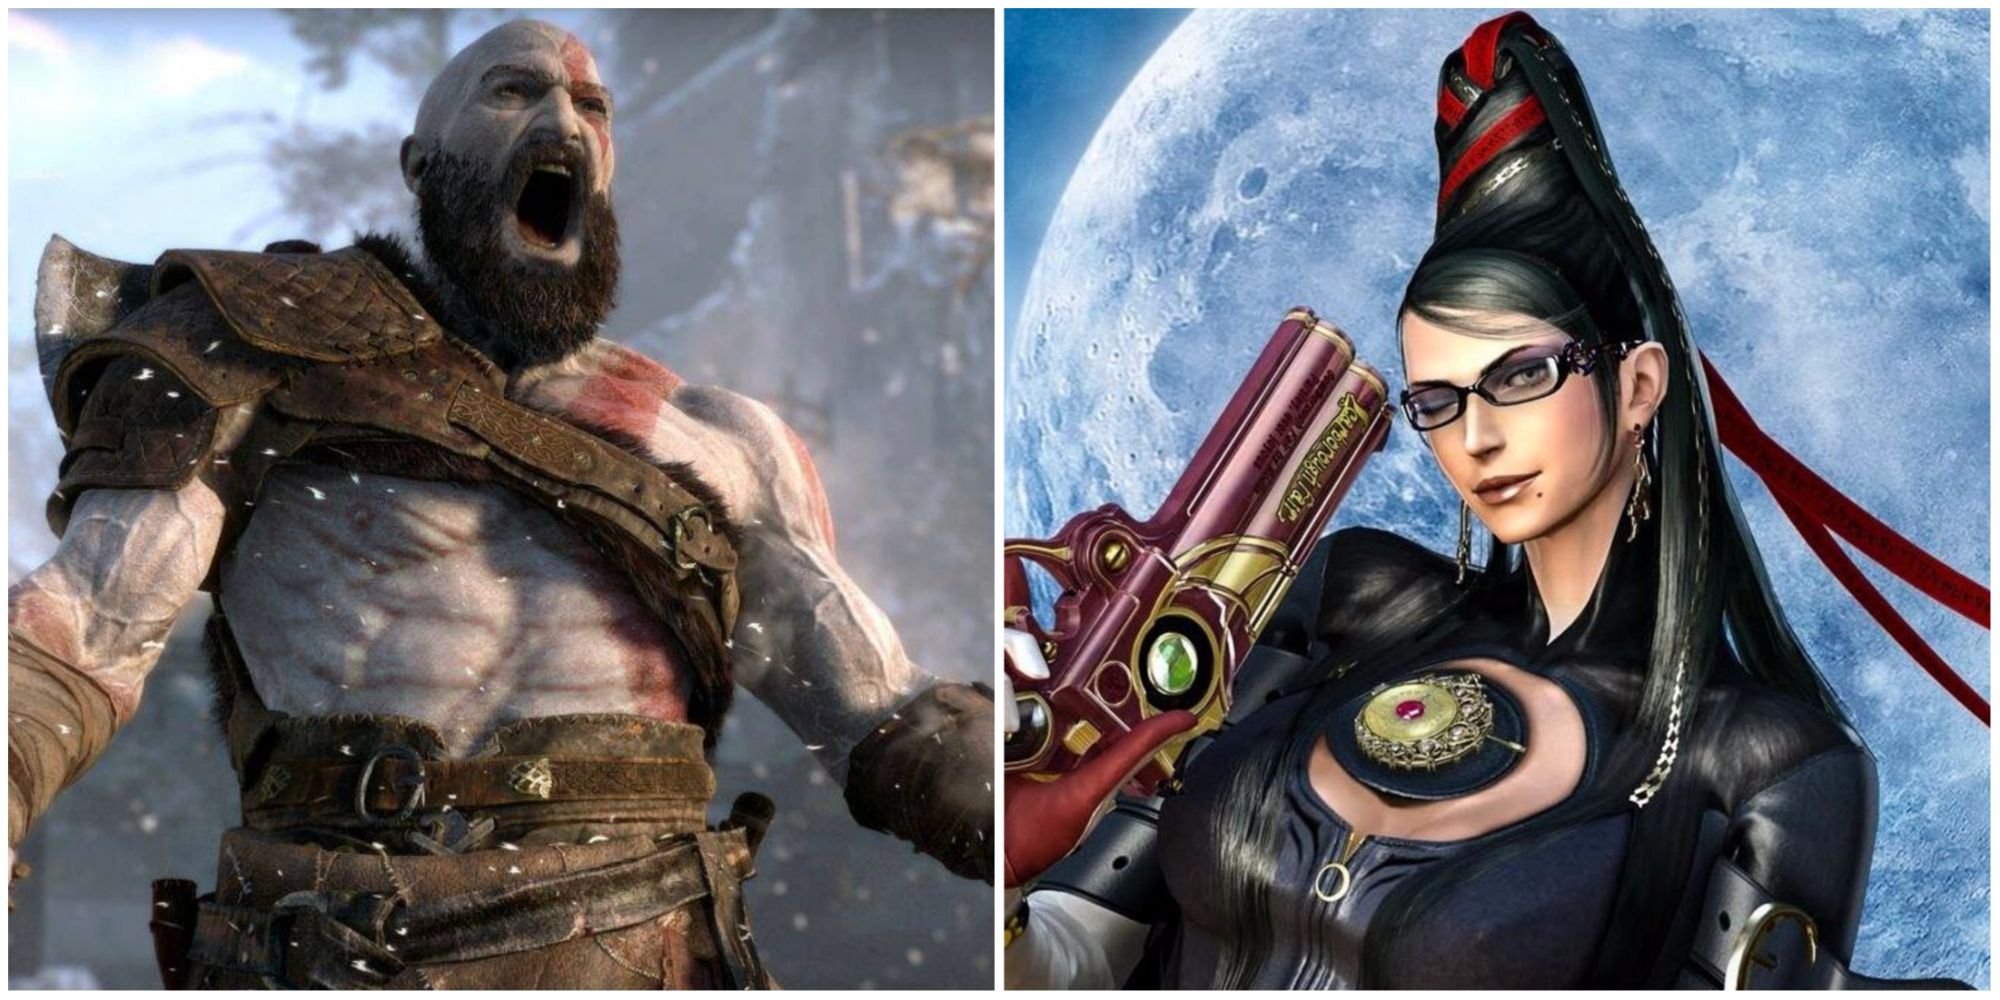 Kratos shouting and Bayonetta winking with her gun in front of the moon